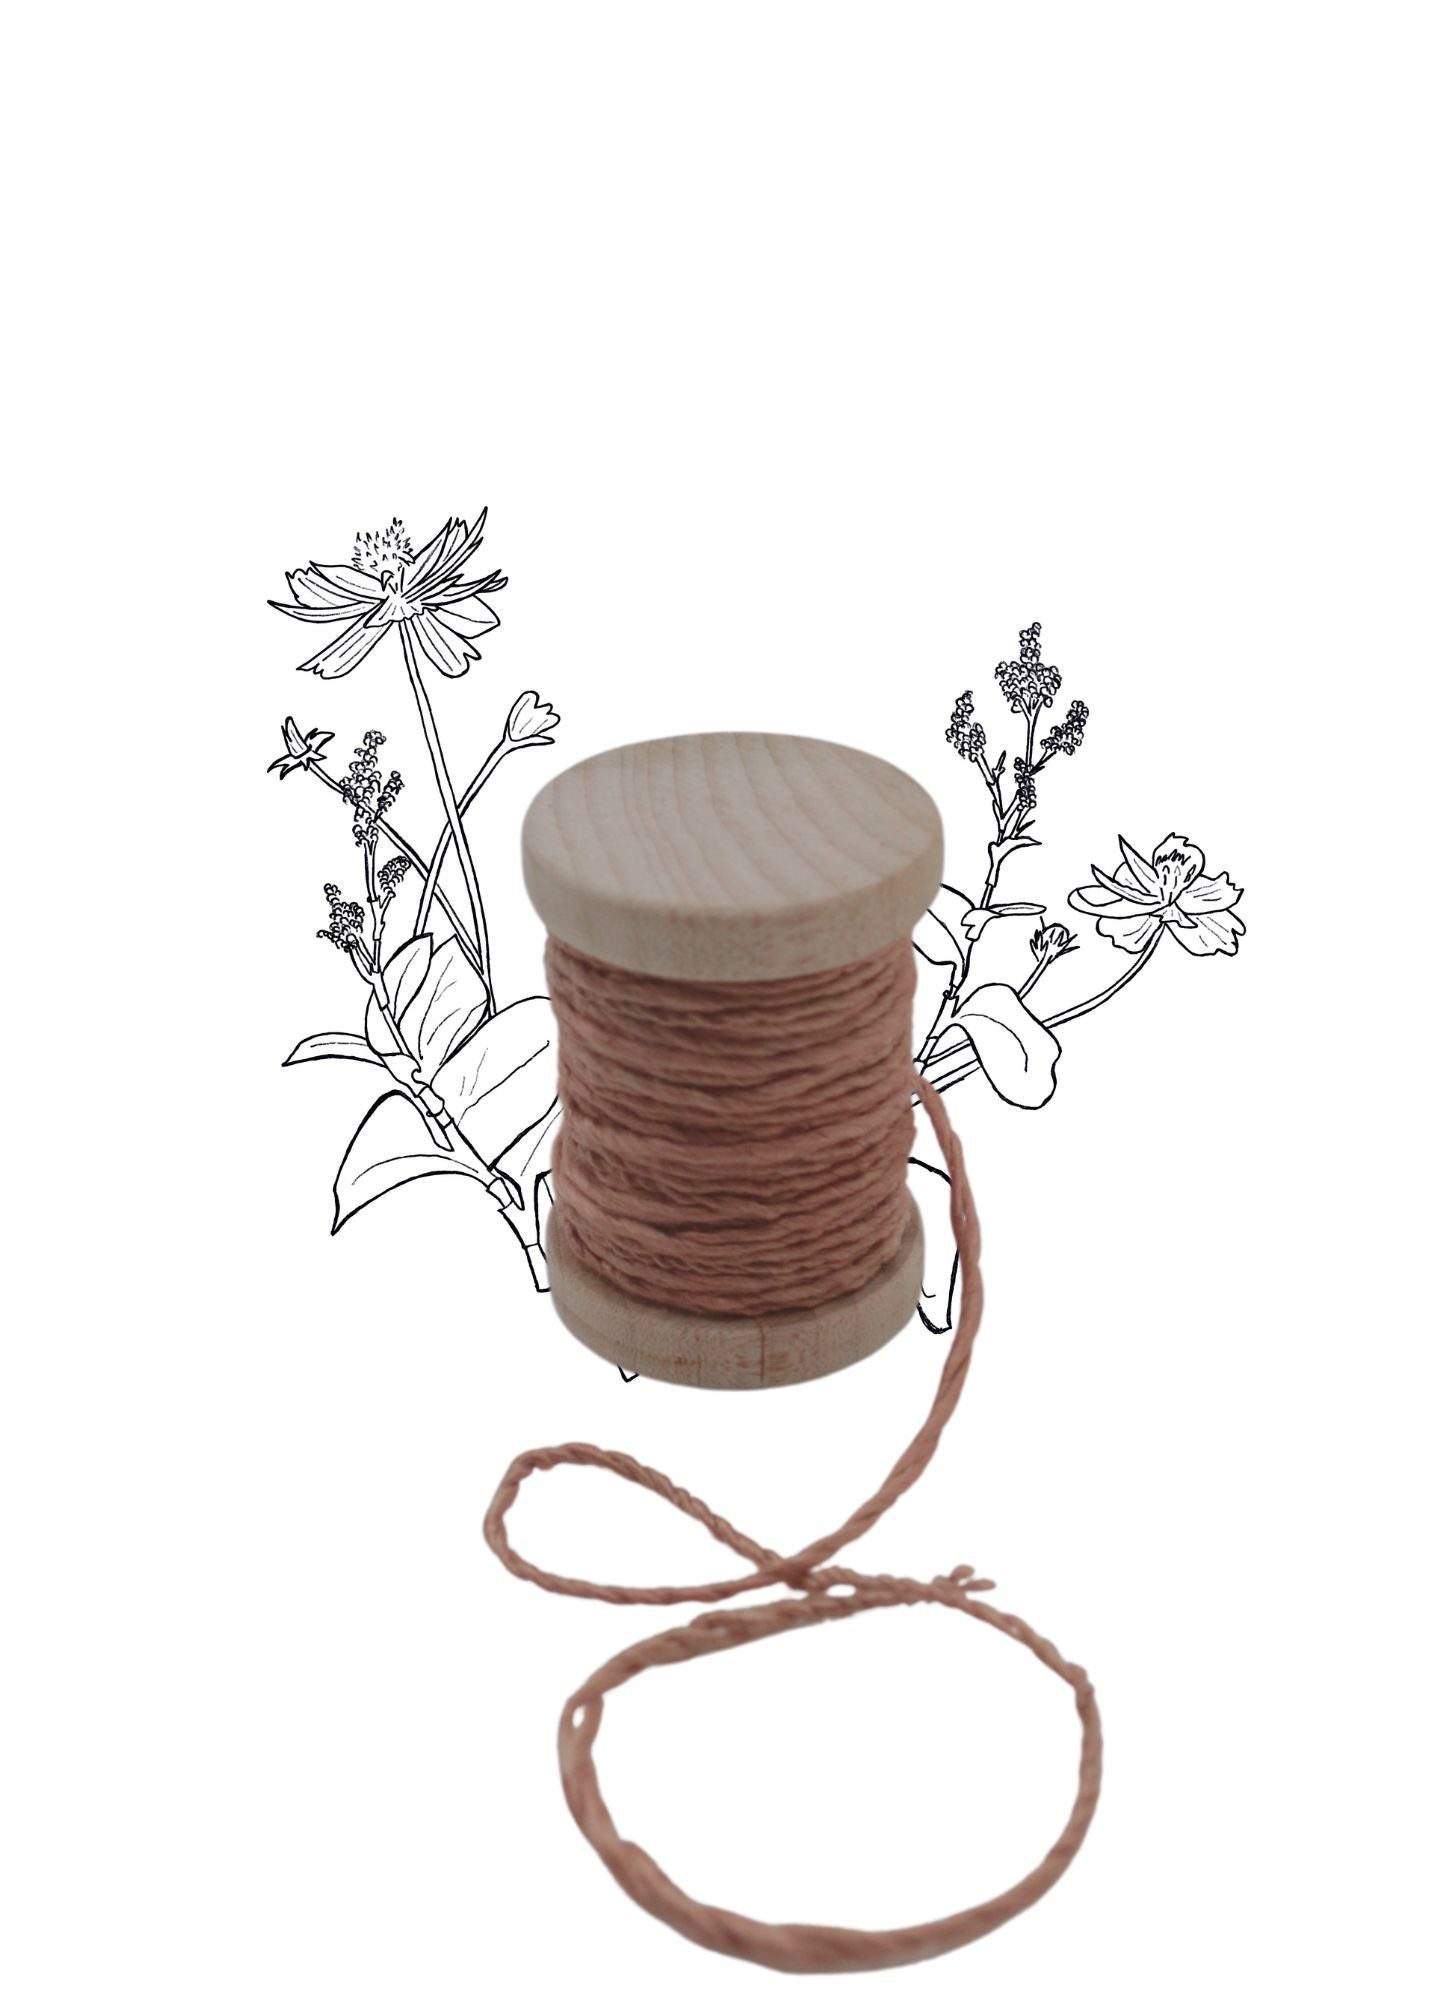 Vintage Rose Silk/Wool Twine, Hand Spun and Naturally Dyed. - The Lesser Bear